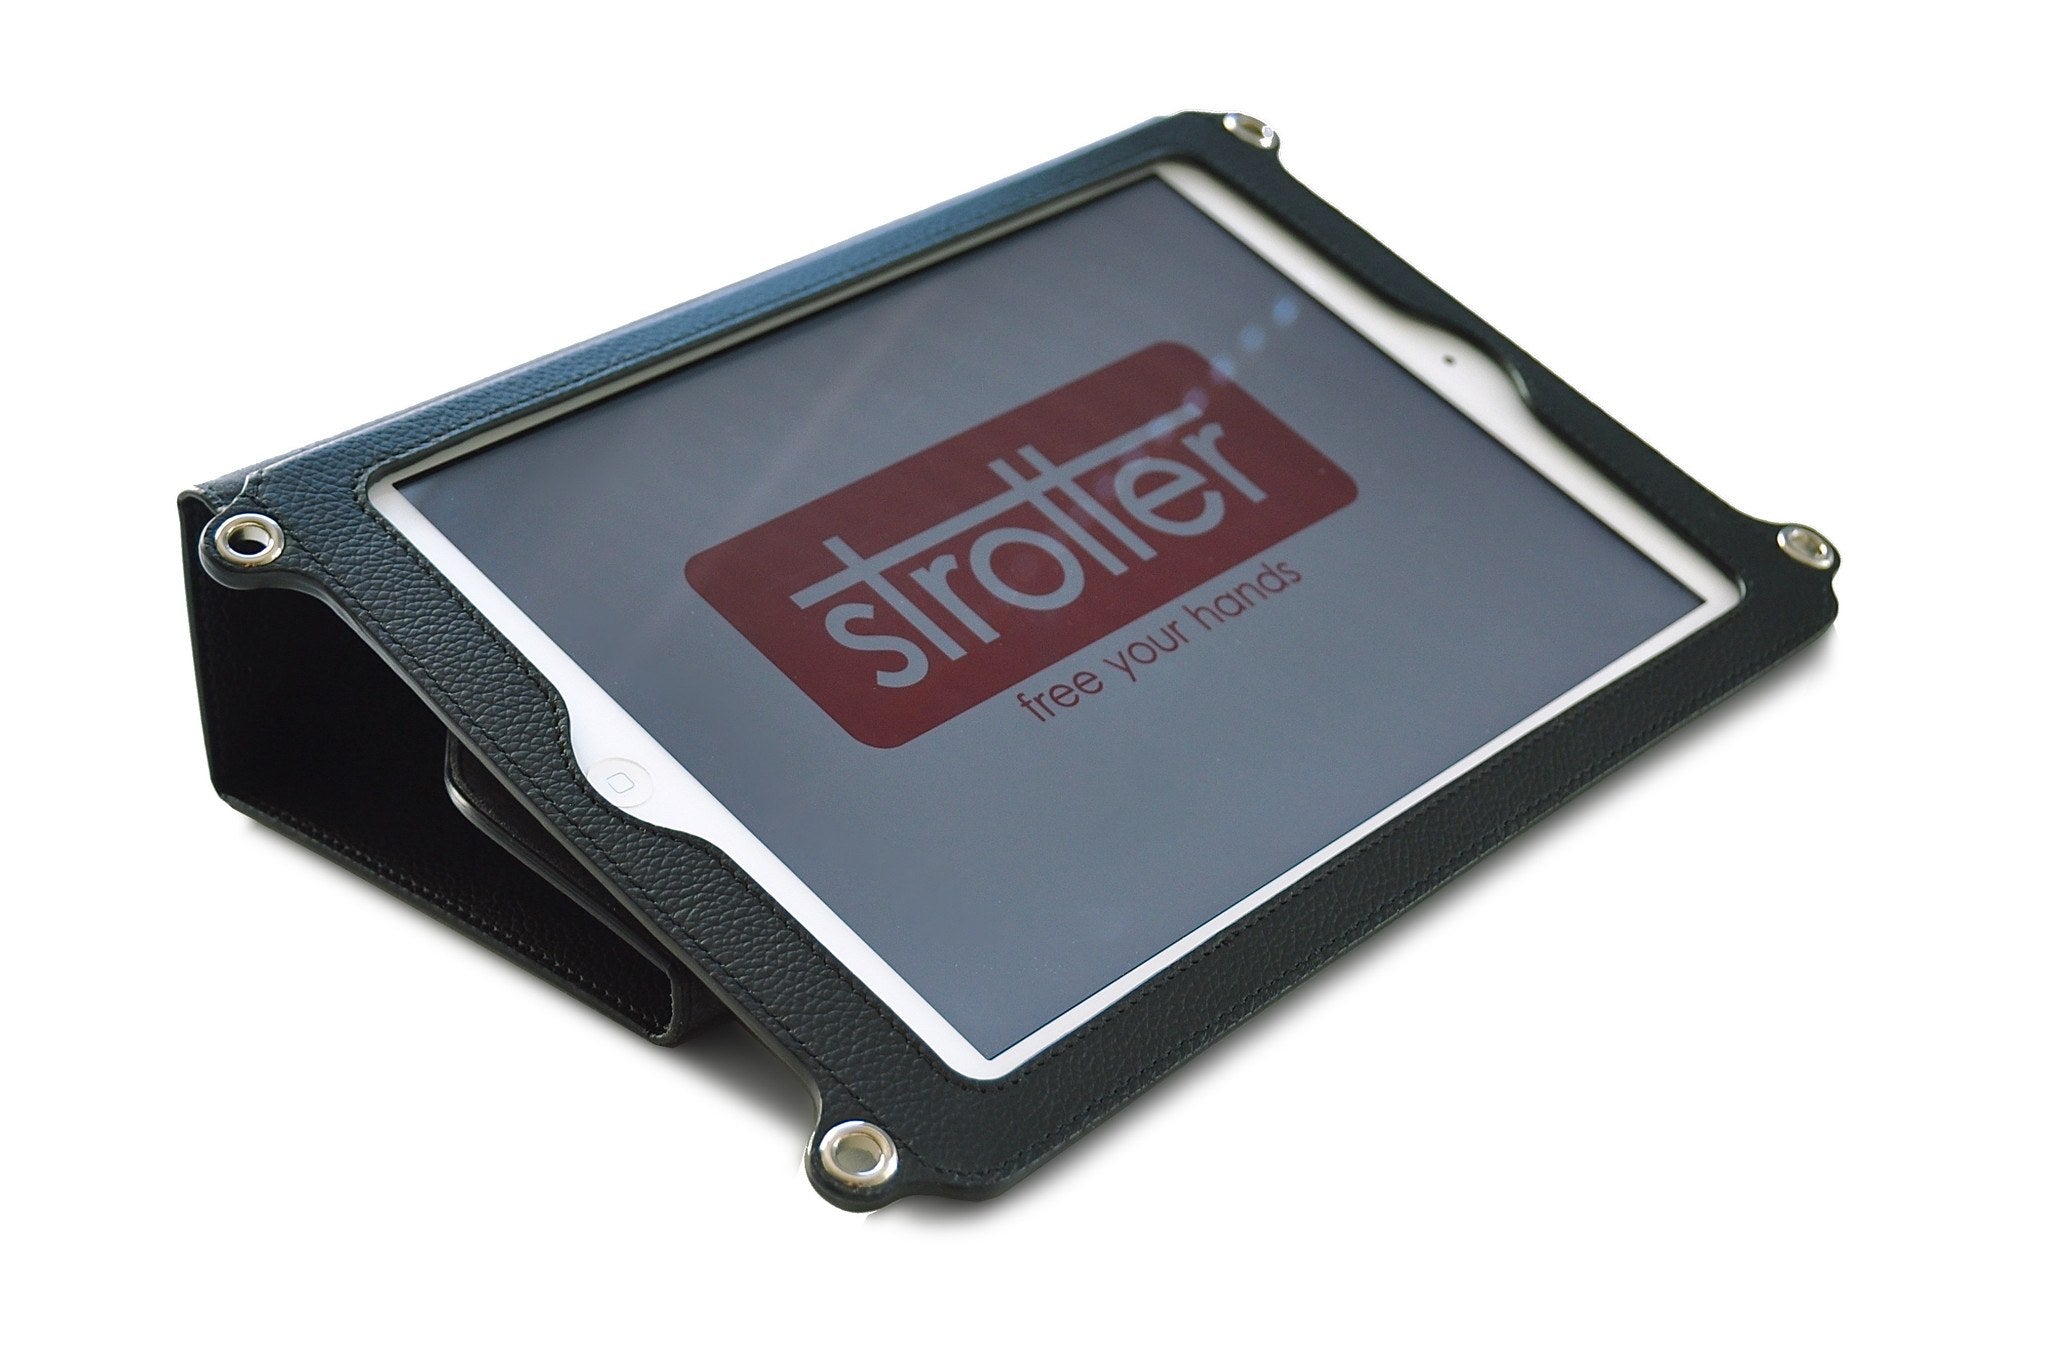 iPad case by Strotter